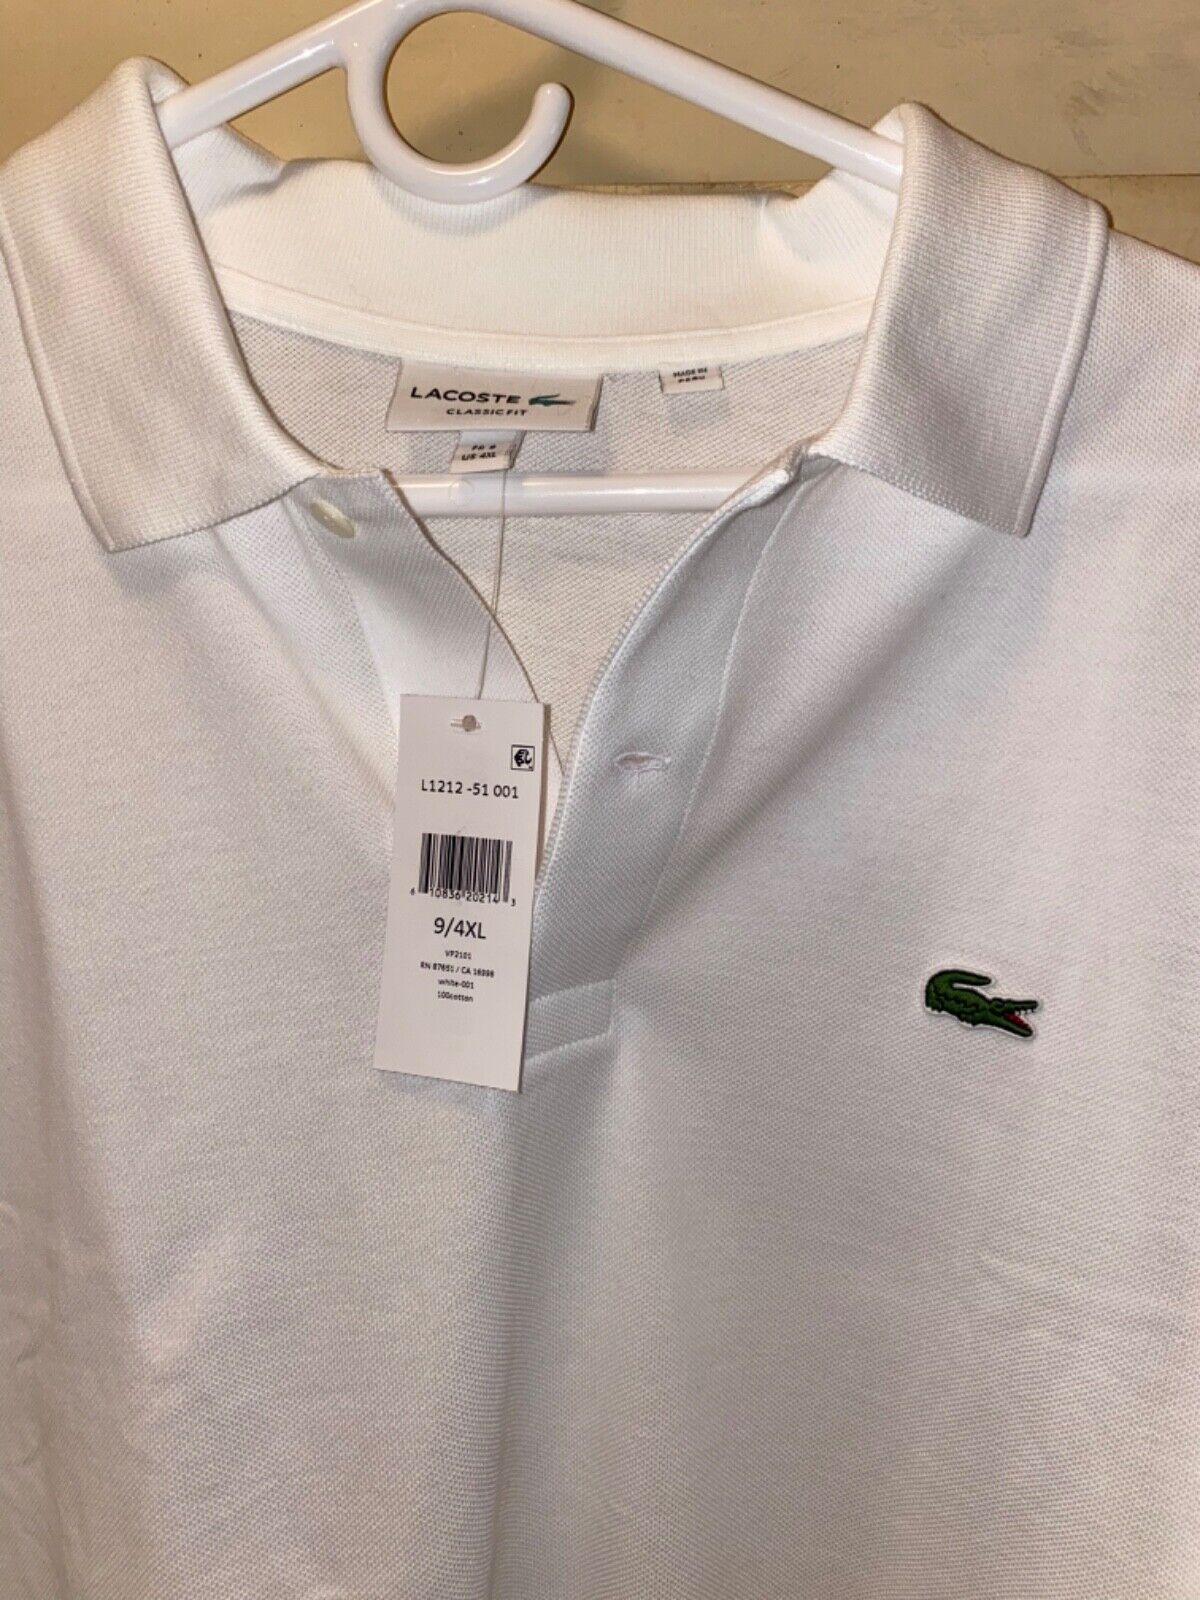 Man's Shirts & Tops Lacoste 4XL Classic Polo Shirt new